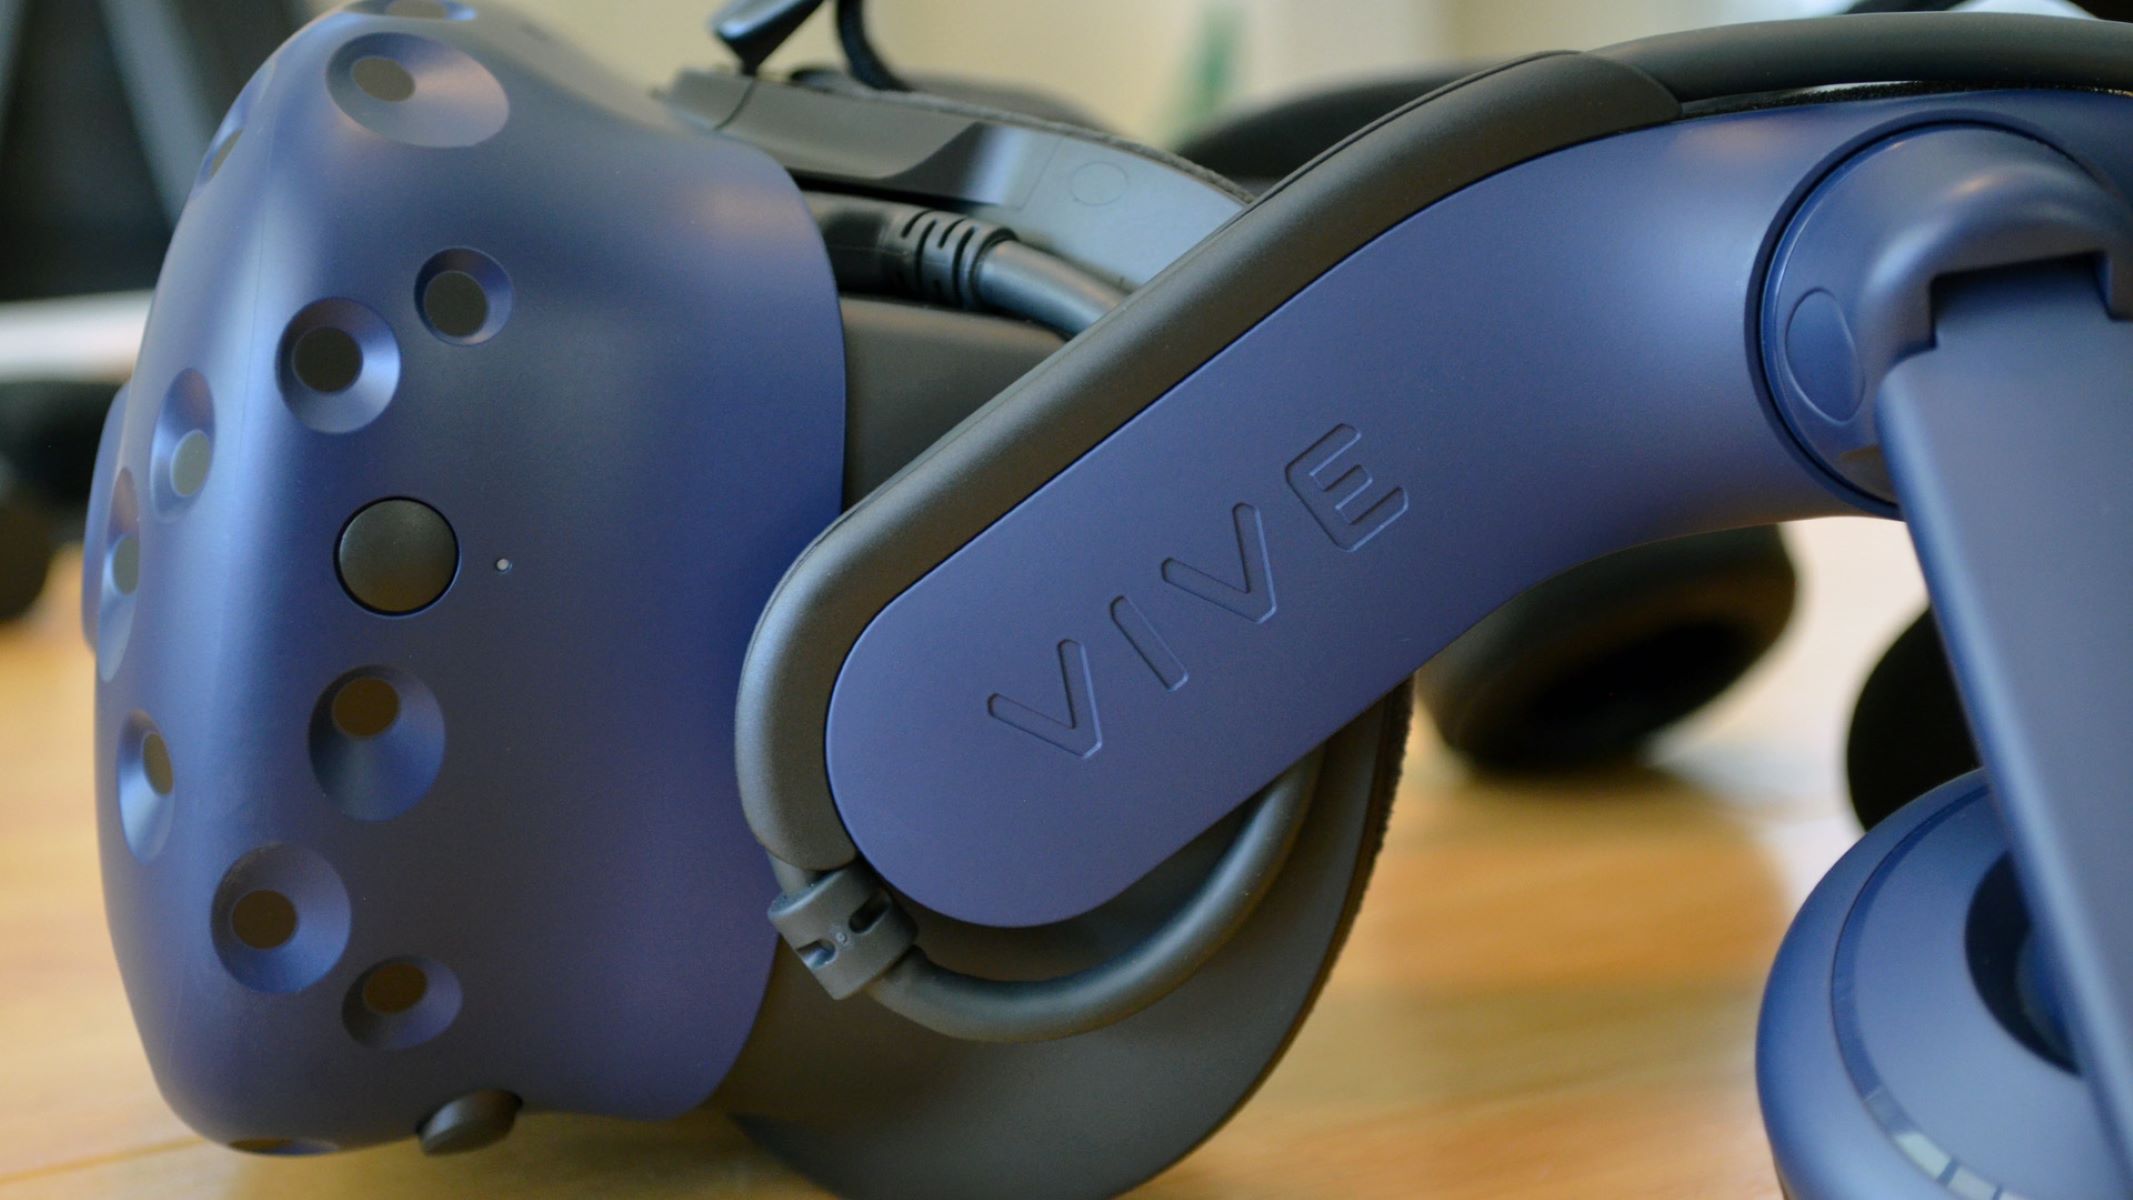 How To Mute Your Mic In HTC Vive